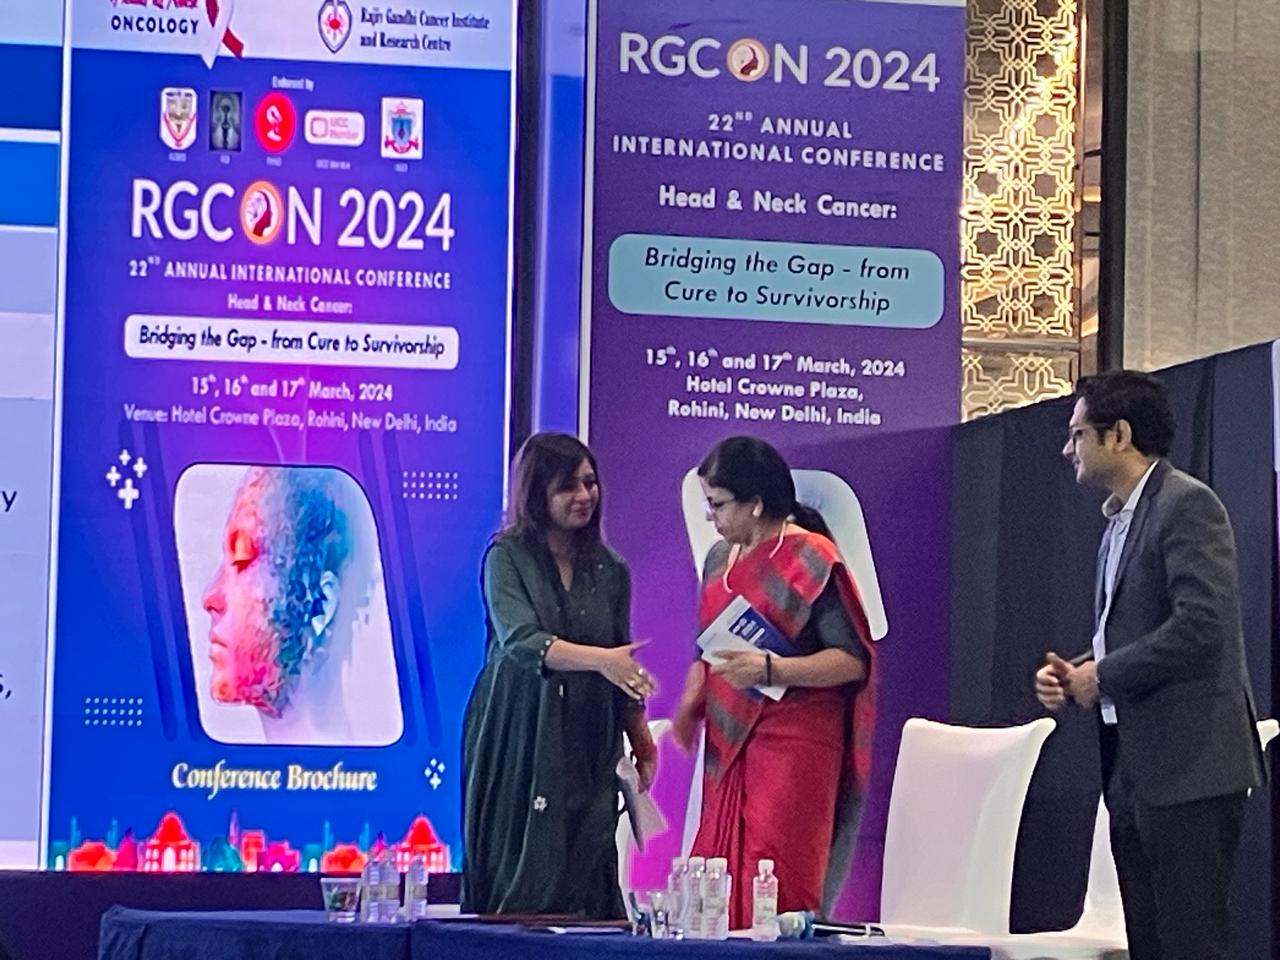 (L-R) Ms. Pratima Reddy, Country Speaker for Merck India & MD, Merck Specialties Pvt Ltd, along with Dr. Pinky Yadav, Medical Superintendent, Rajiv Gandhi Cancer Institute and Research Centre (RGCIRC) at the MoU